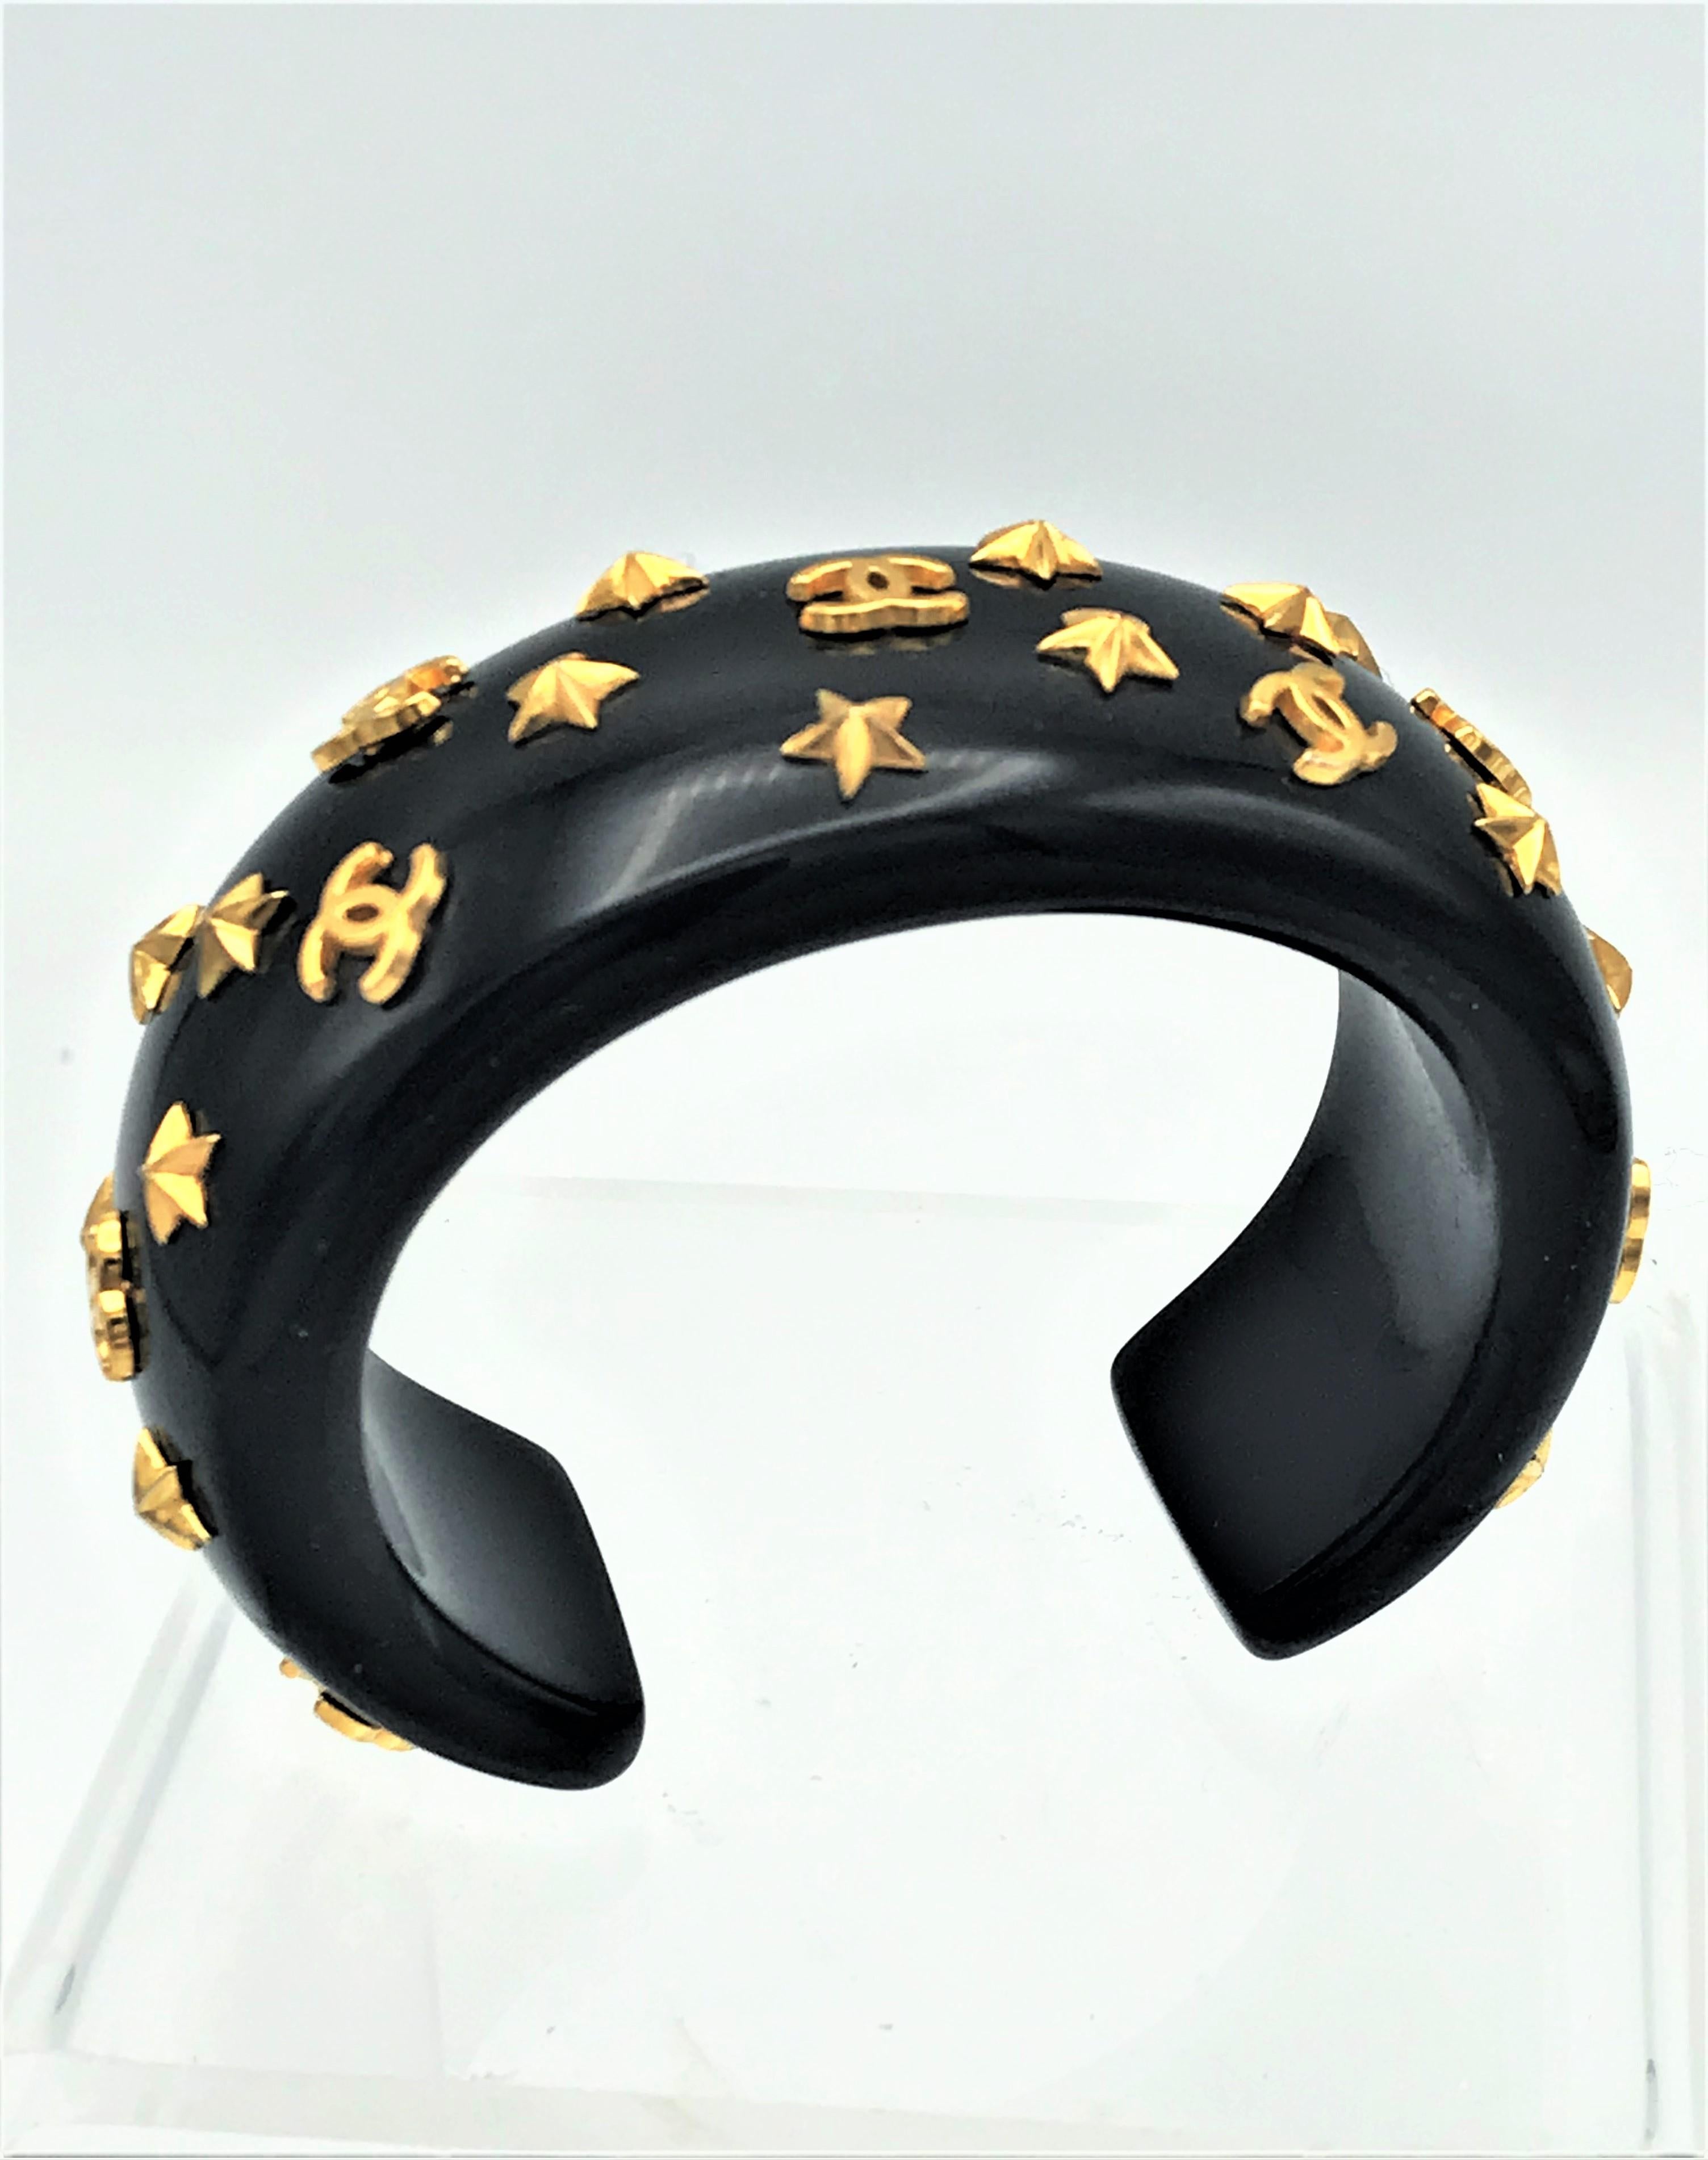 Artisan Chanel open bracelet, molded black acrylic signed 95 CC P with gold stars and CC